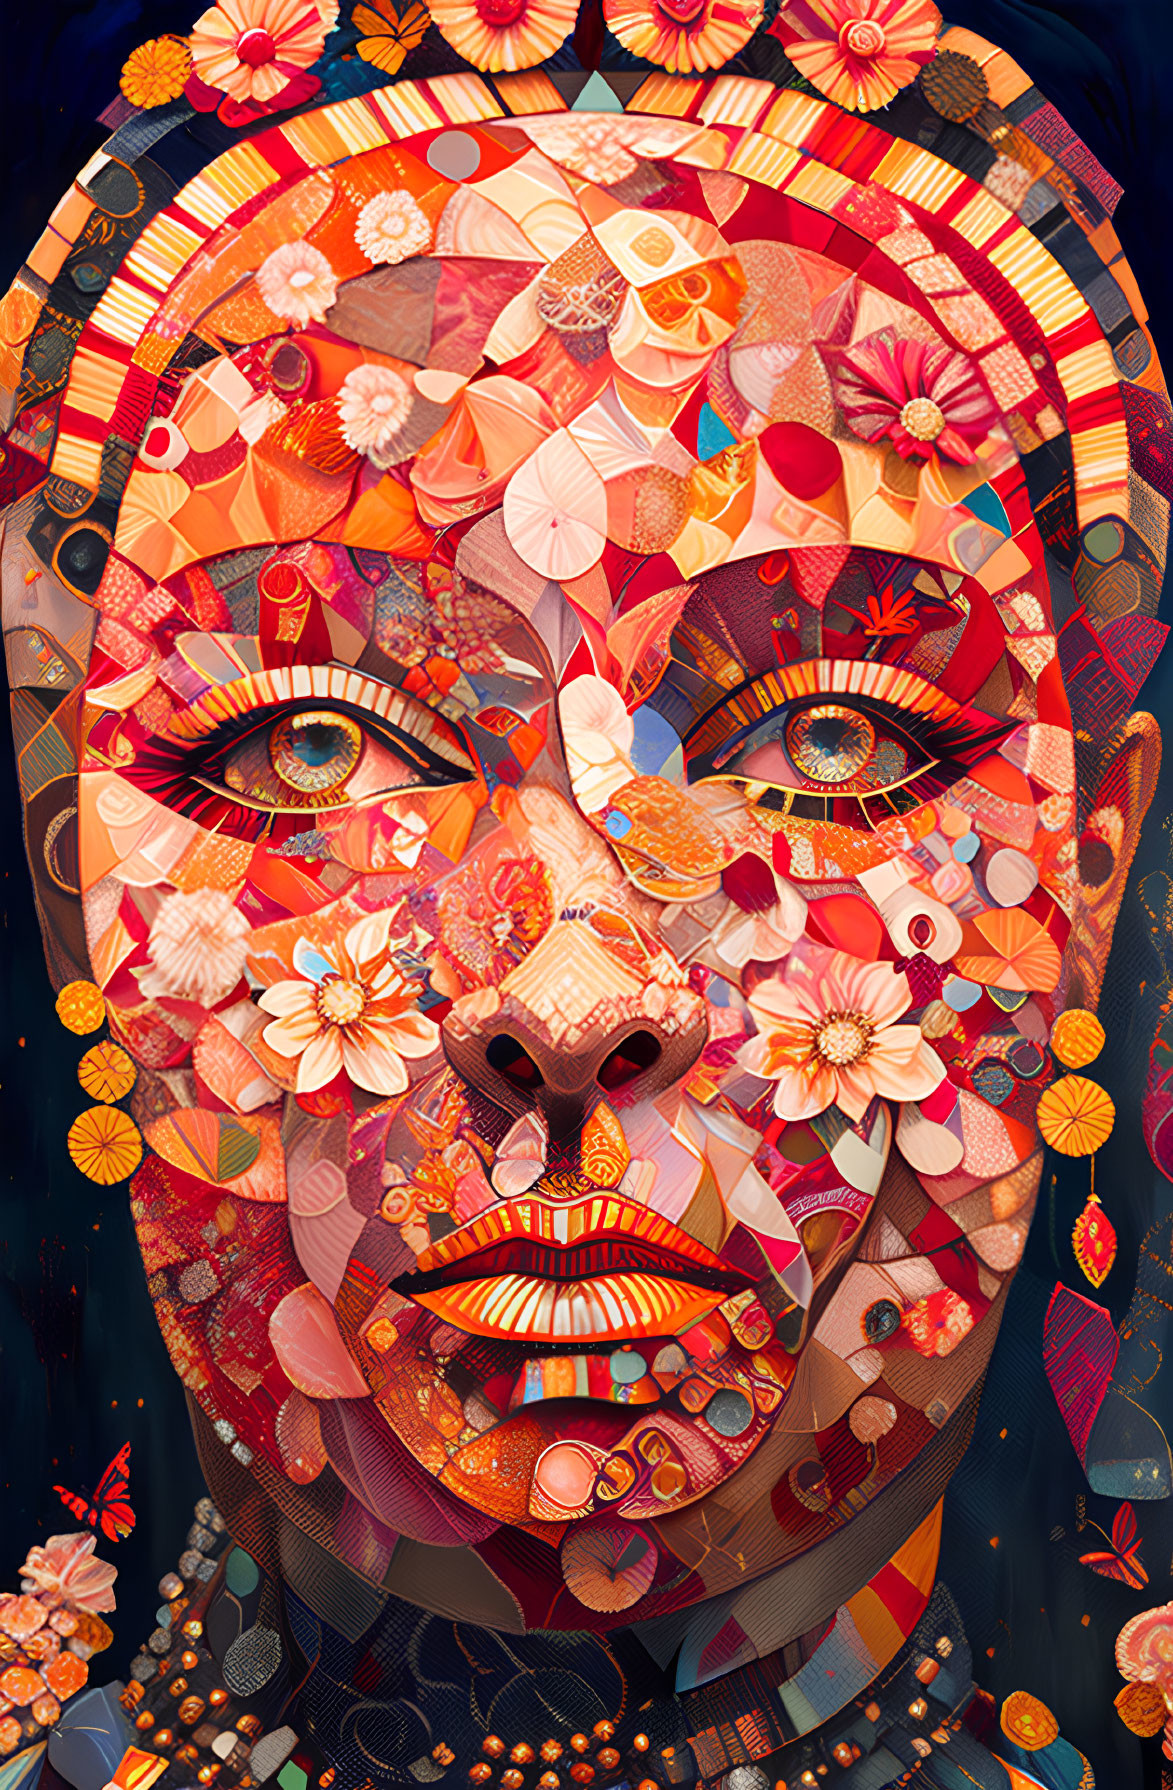 Colorful mosaic-style face illustration with floral and geometric patterns in warm tones and blue eyes